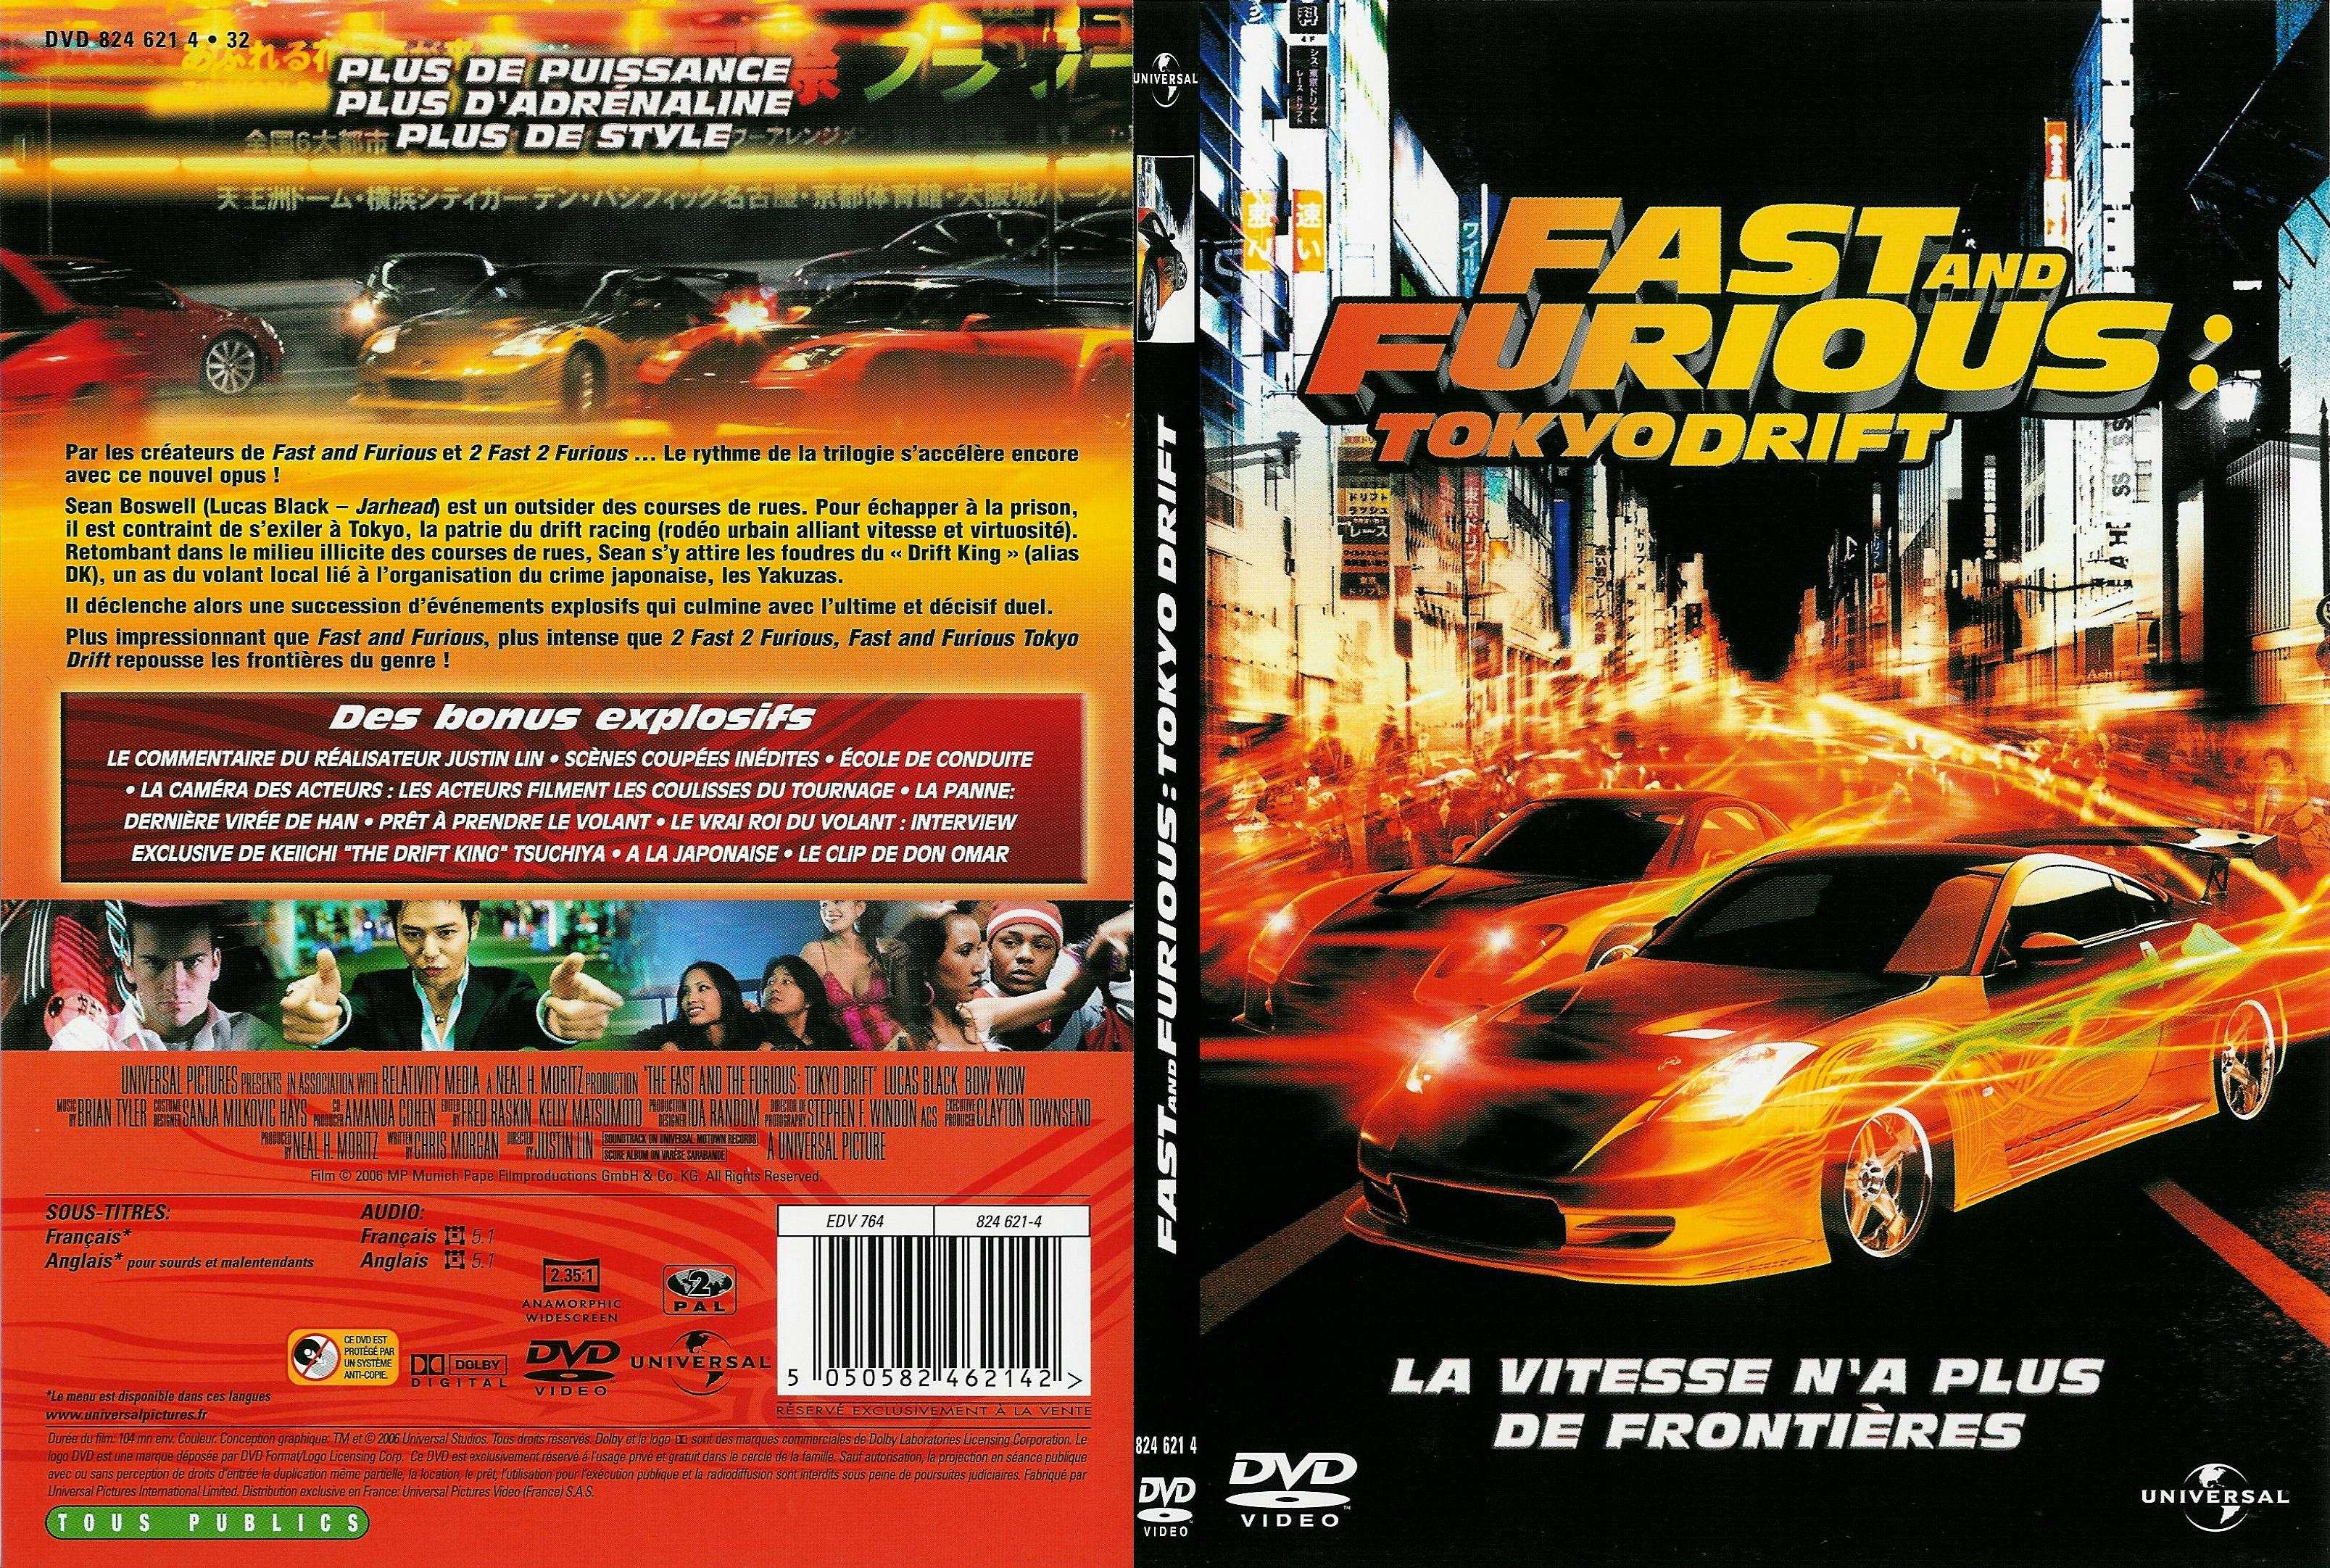 Jaquette DVD Fast and Furious Tokyo Drift - SLIM